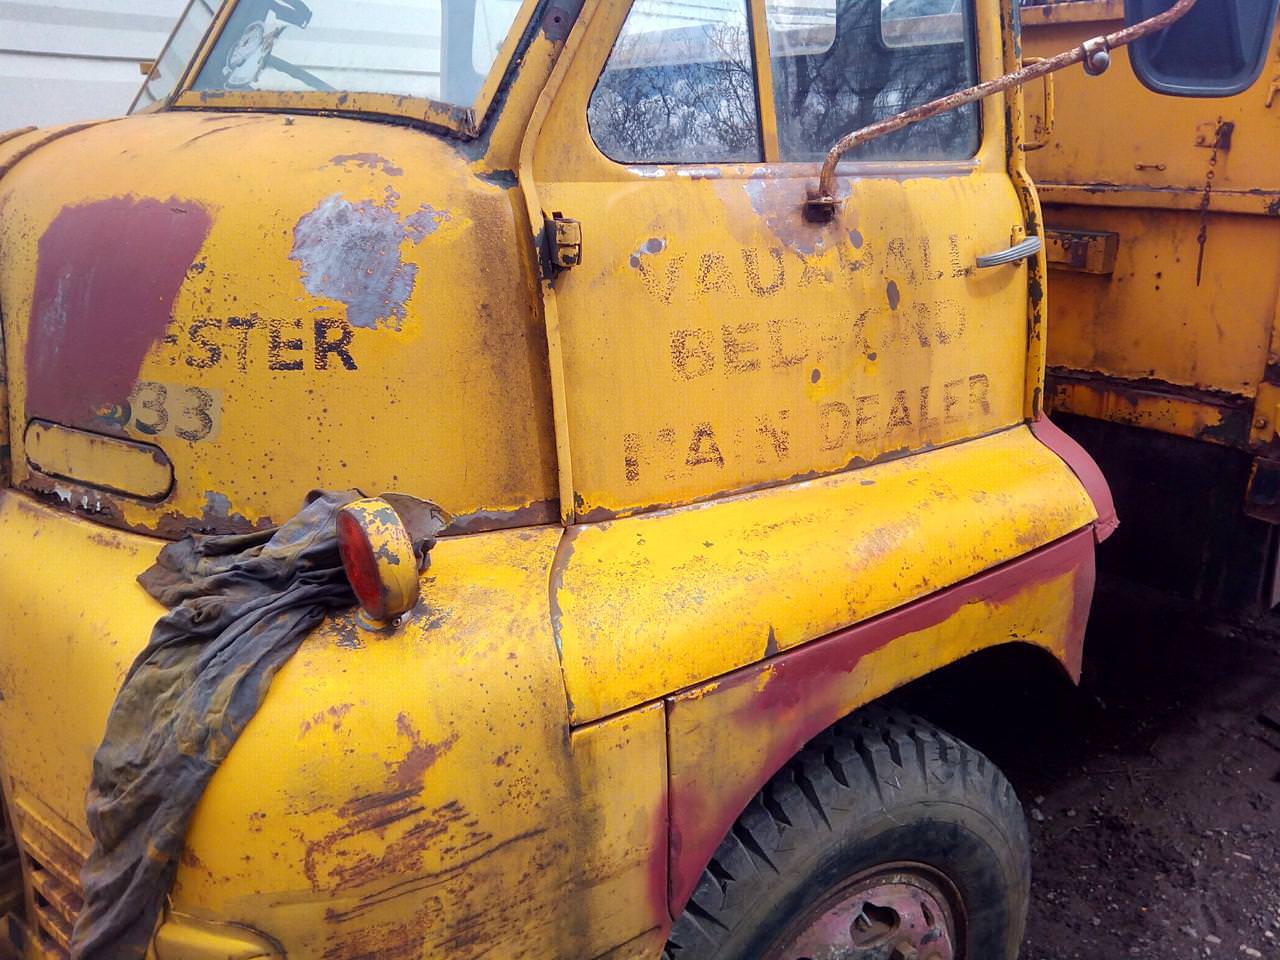 The passenger side of the truck's cab, with the
bottom of the door looking a much more vibrant yellow than the rest of
the cab.